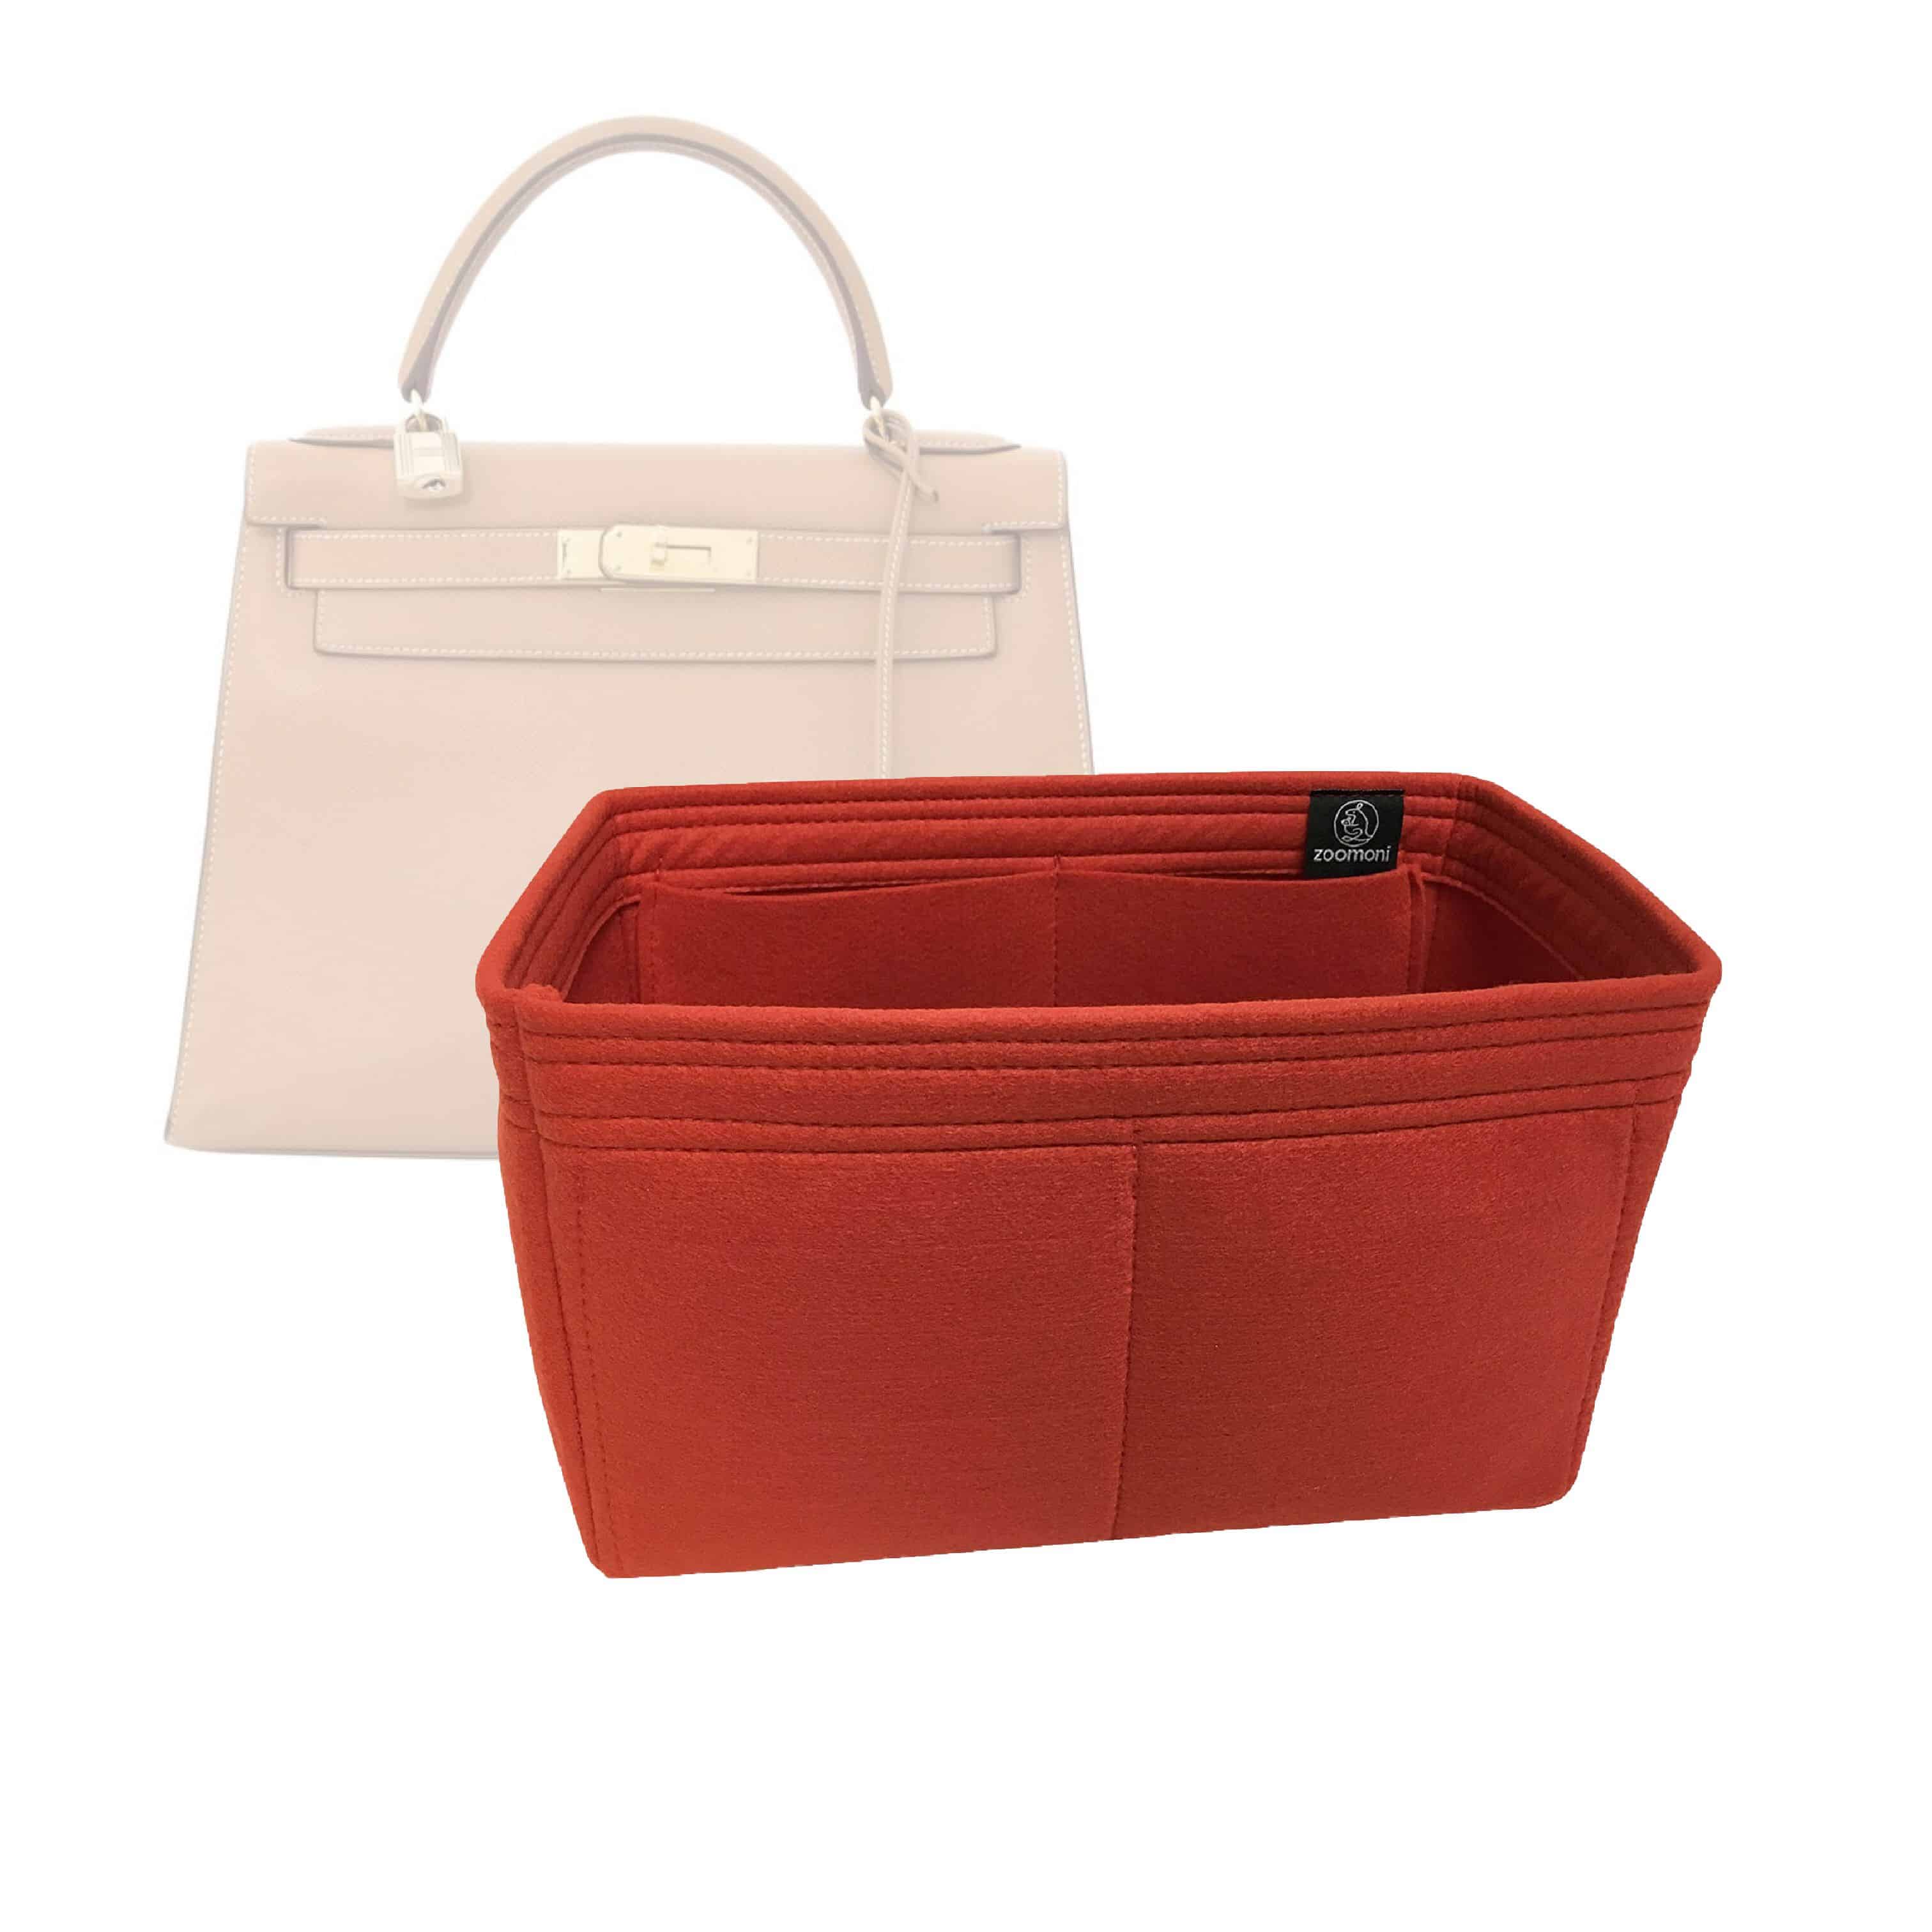 Bag and Purse Organizer with Basic Style for Hermes Kelly Models